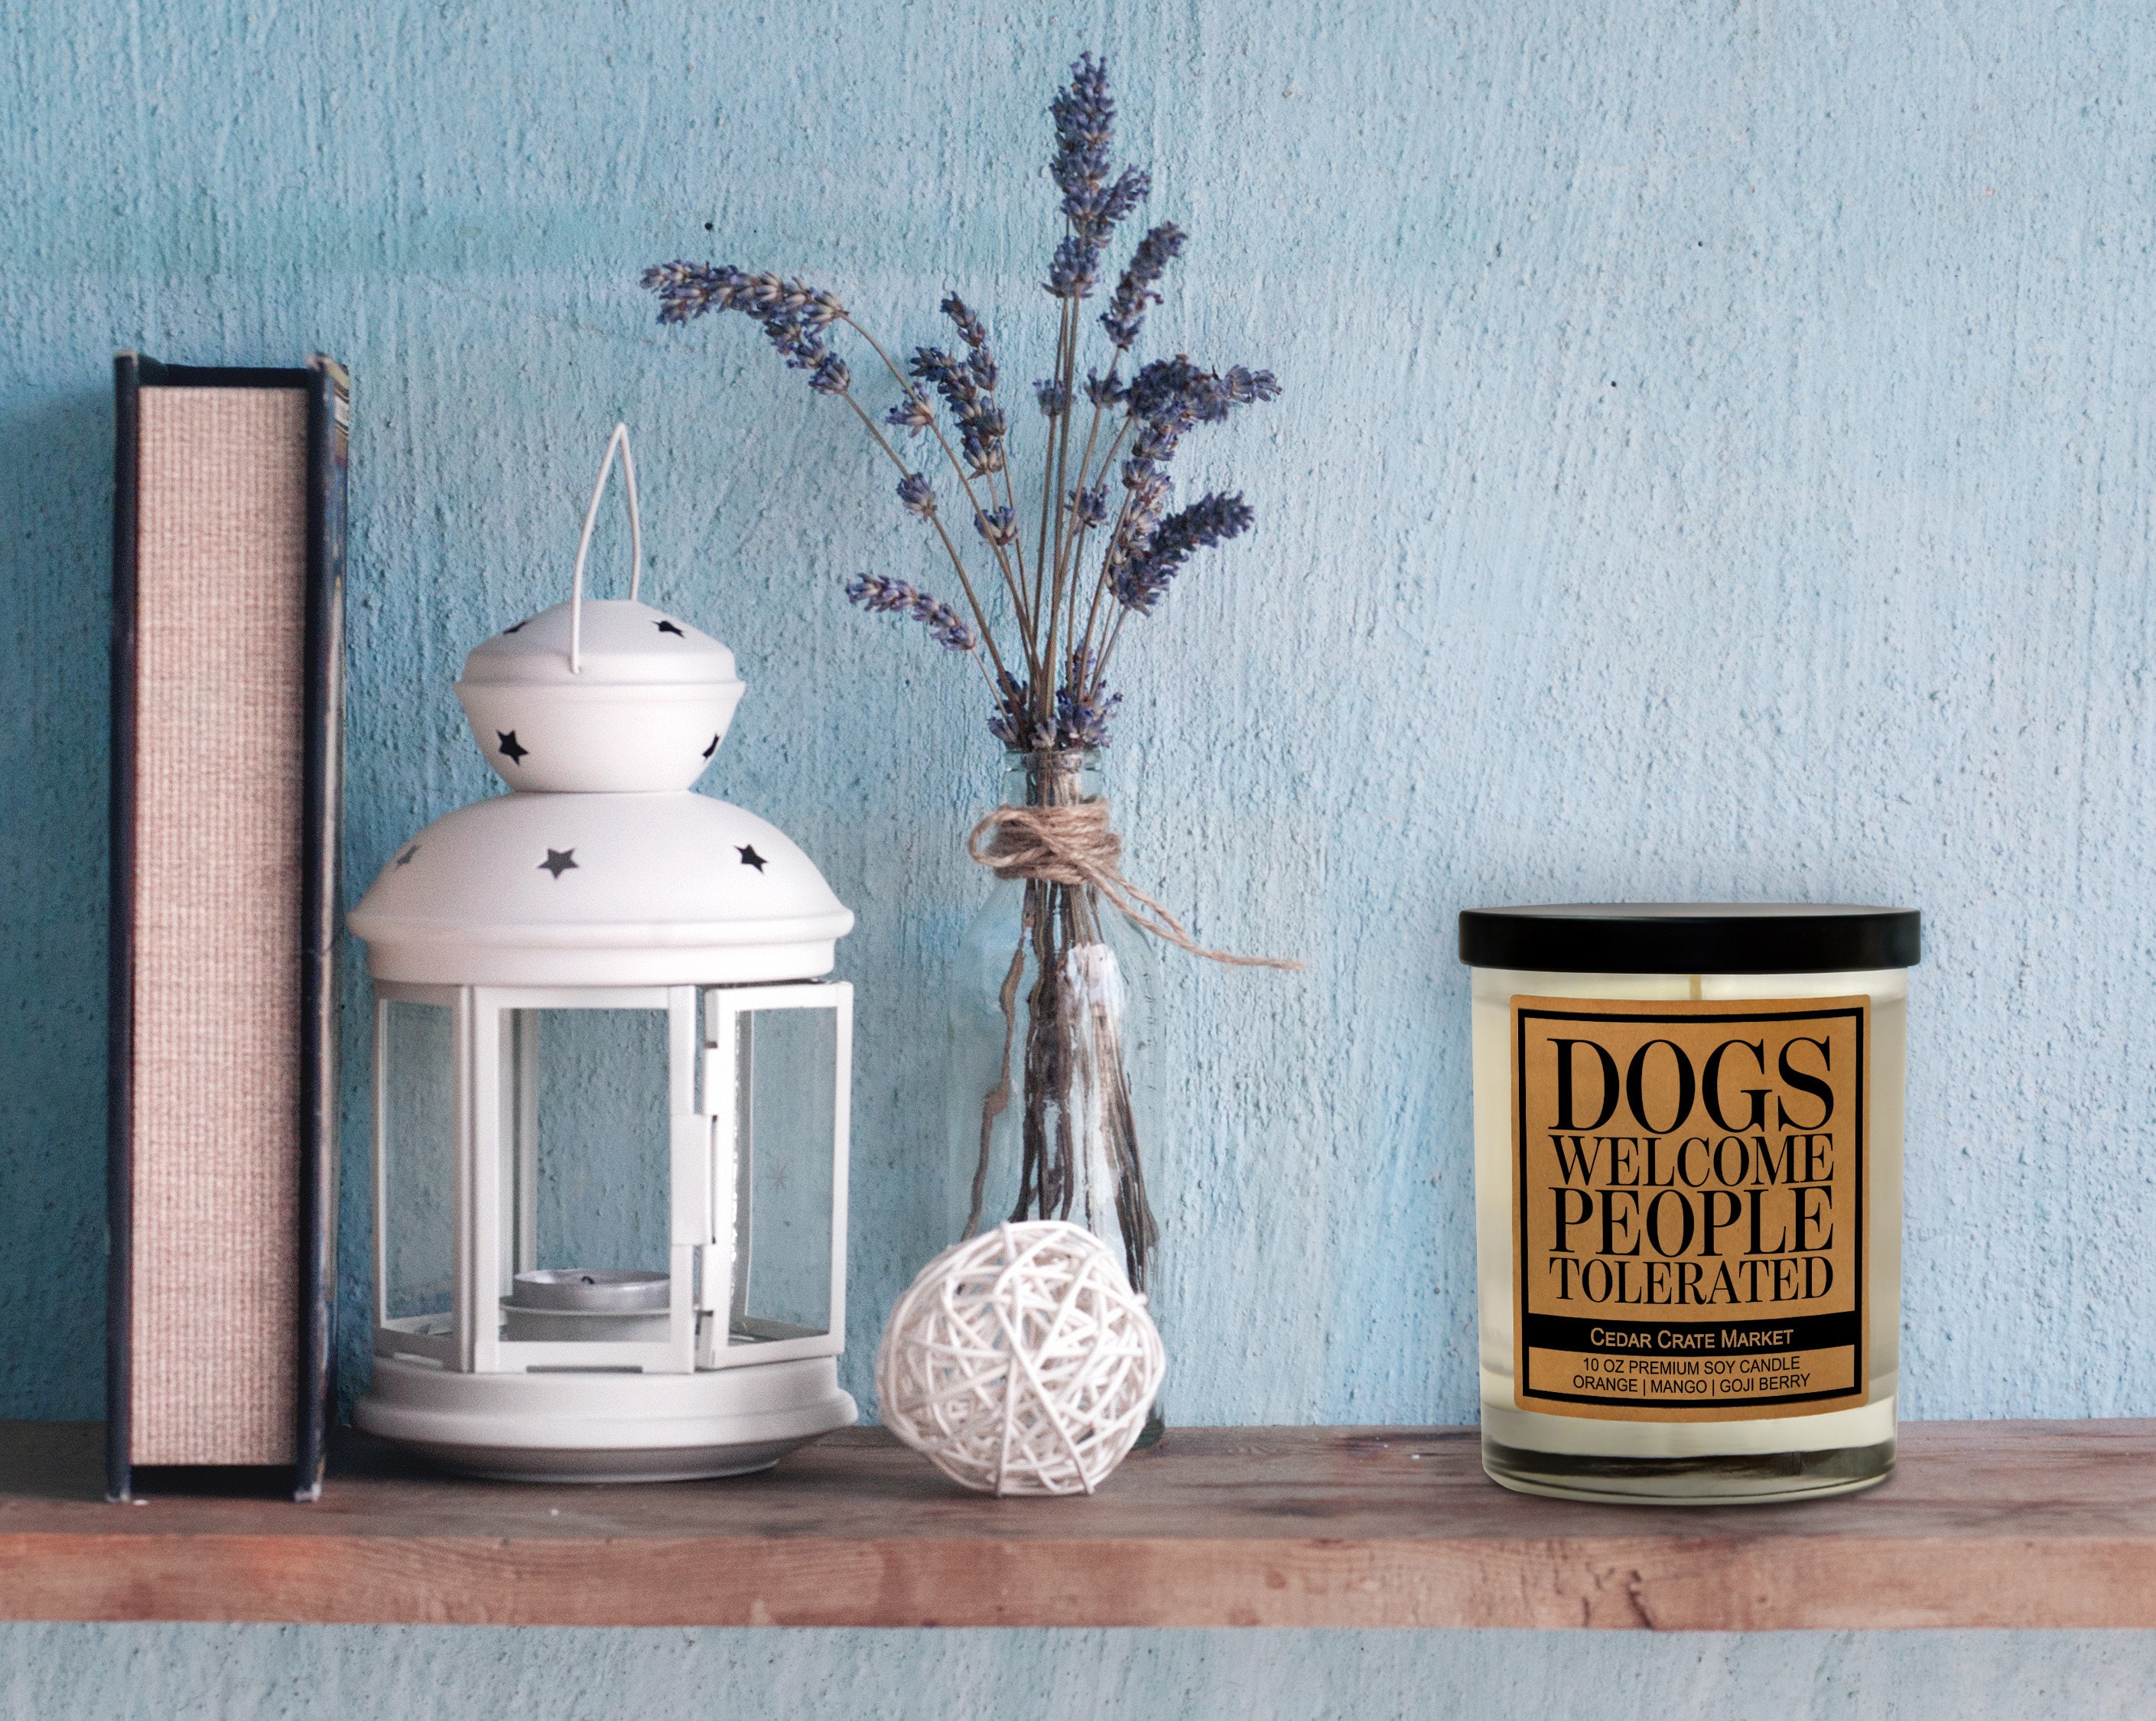 Handmade Soothing Dog-Inspired Scented Candles 